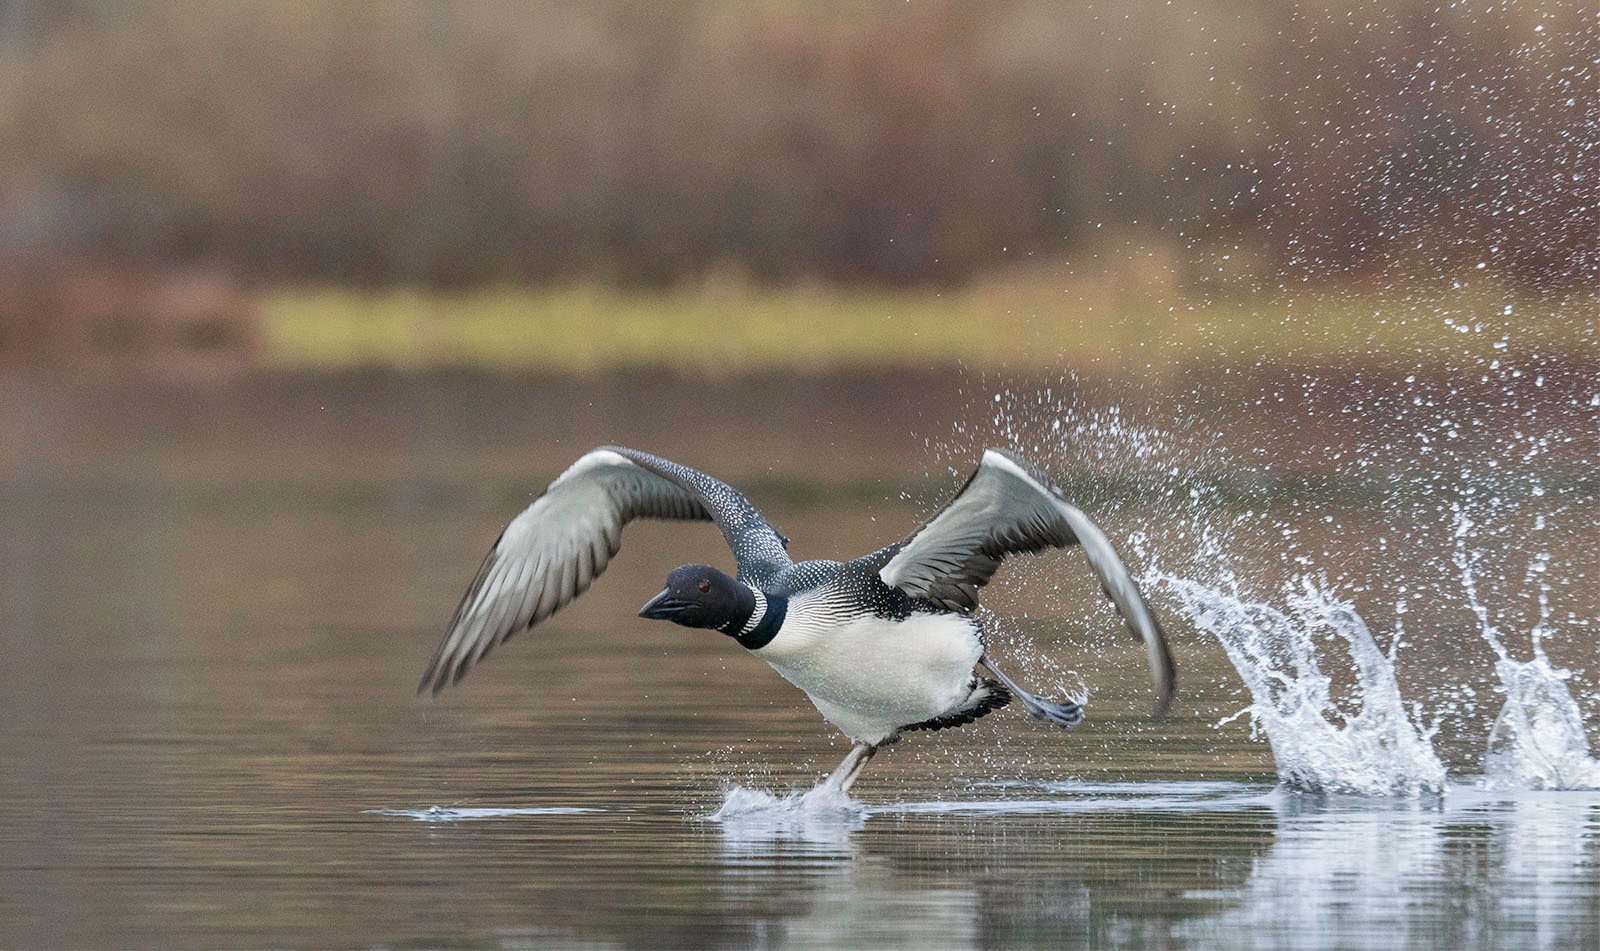 A loon with its wings fully spread takes off from the tranquil lake, splashing water and flying water droplets, showing a dynamic movement effect.